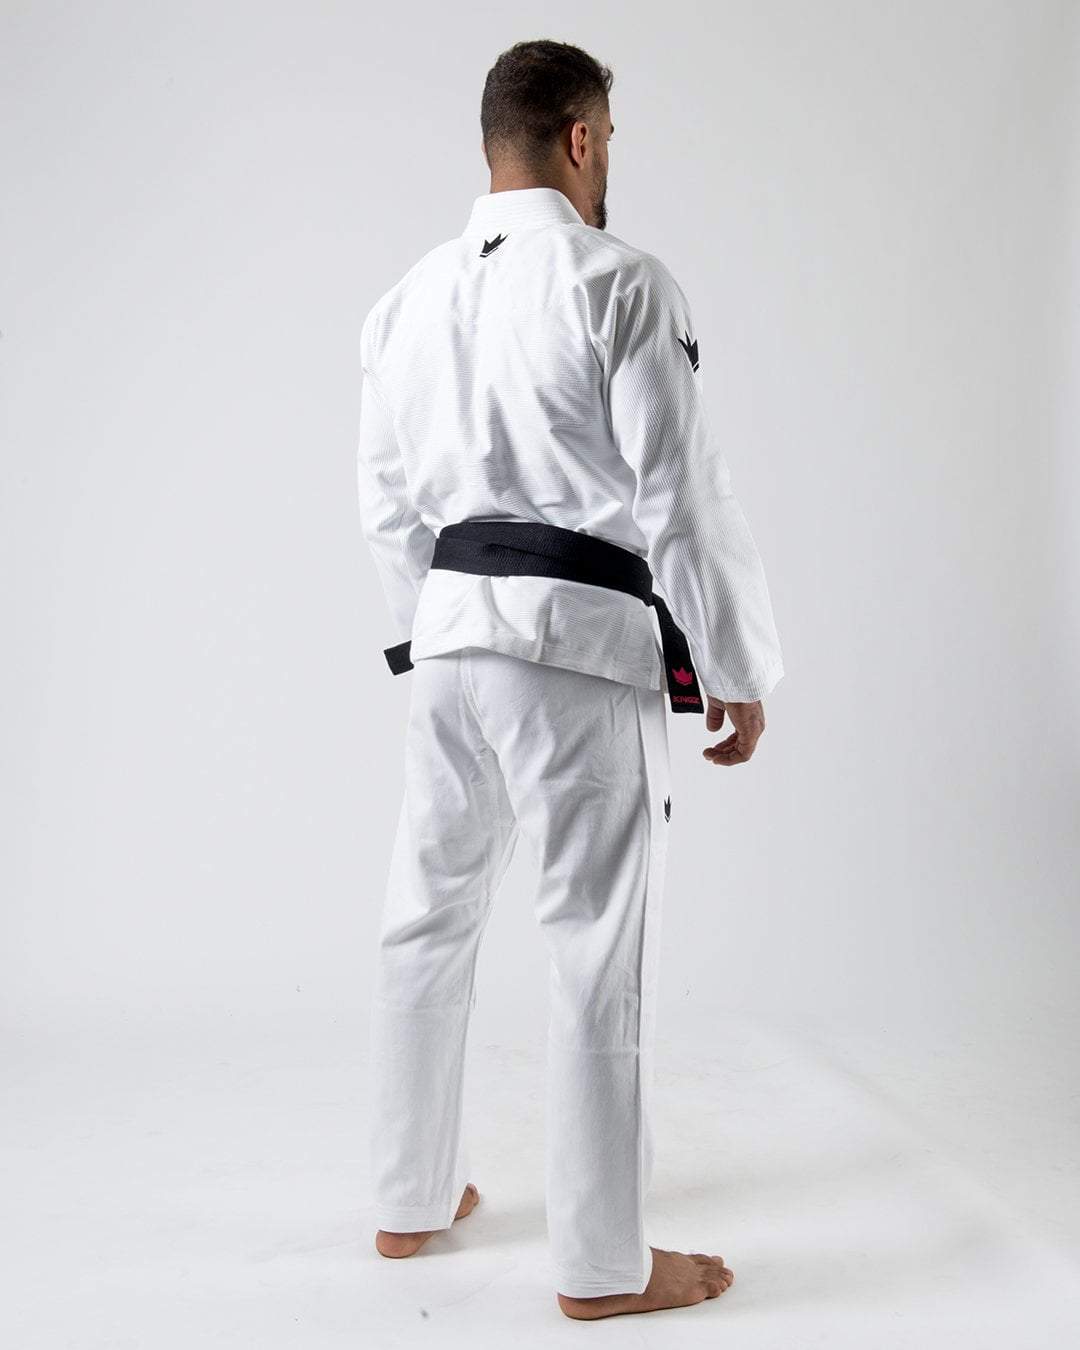 The One - With free white belt